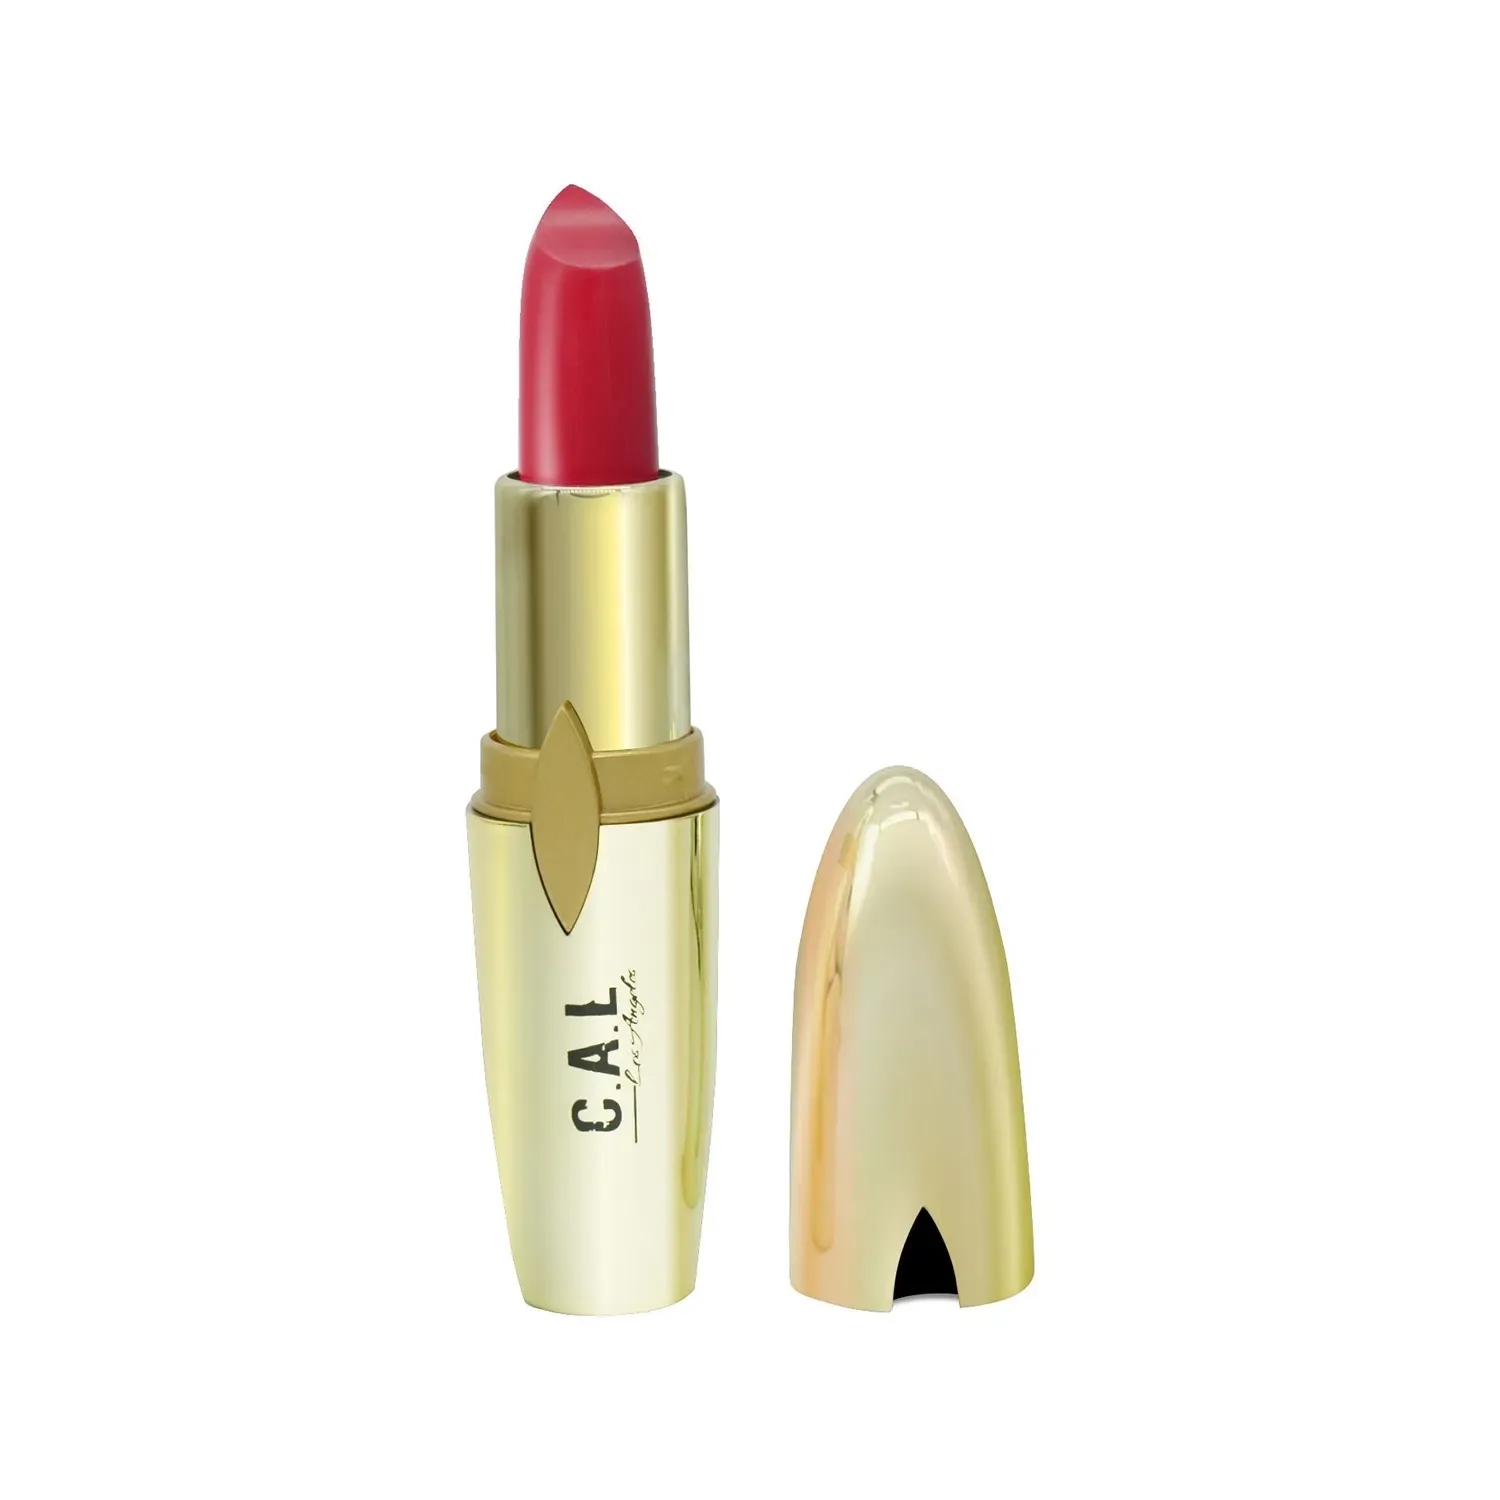 C.A.L Los Angeles | C.A.L Los Angeles Sweet Nectar Perfect Pout Lipstick - Sweet Nectar (15g)